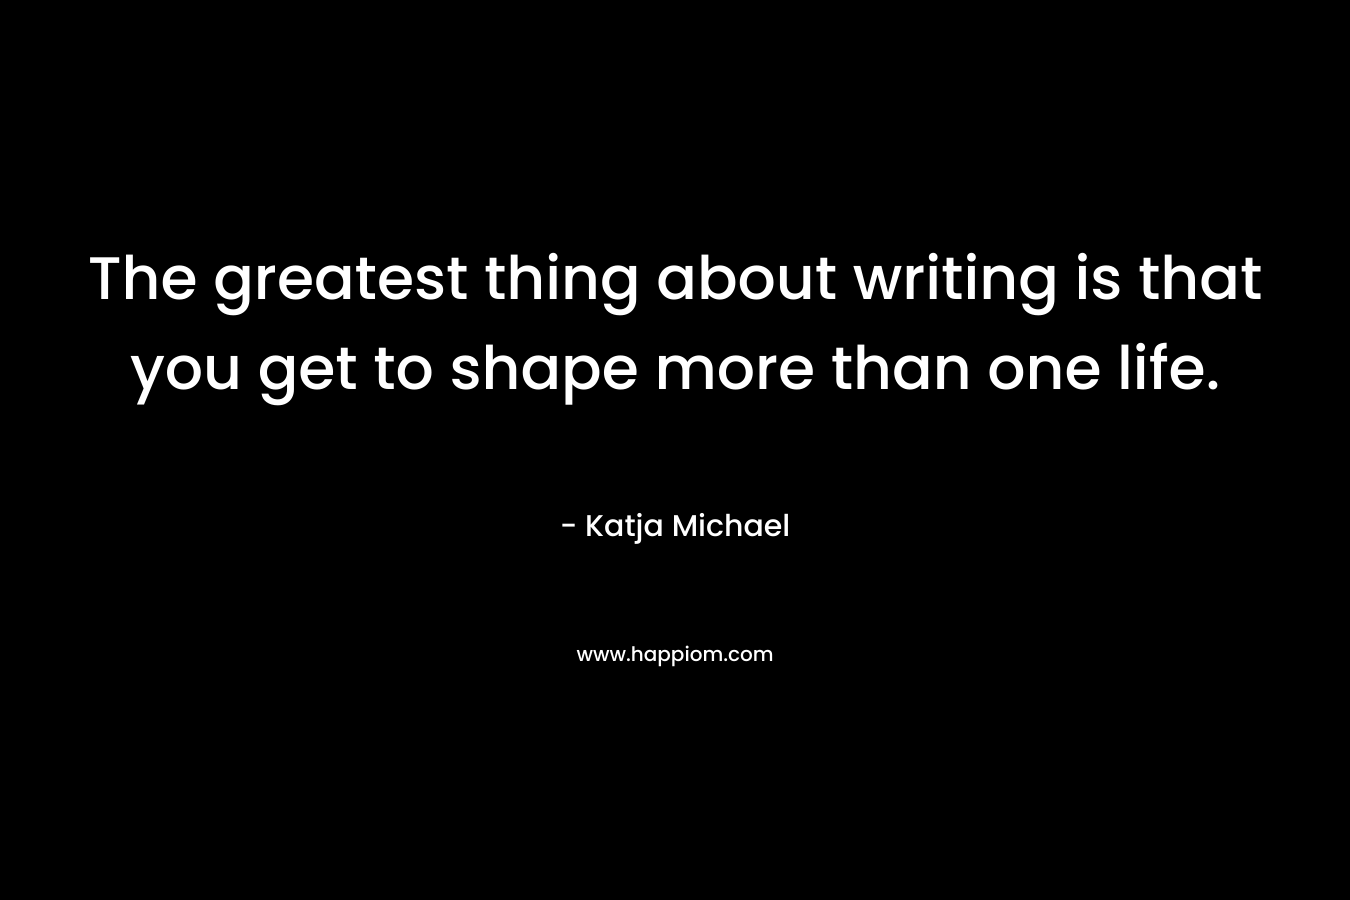 The greatest thing about writing is that you get to shape more than one life.